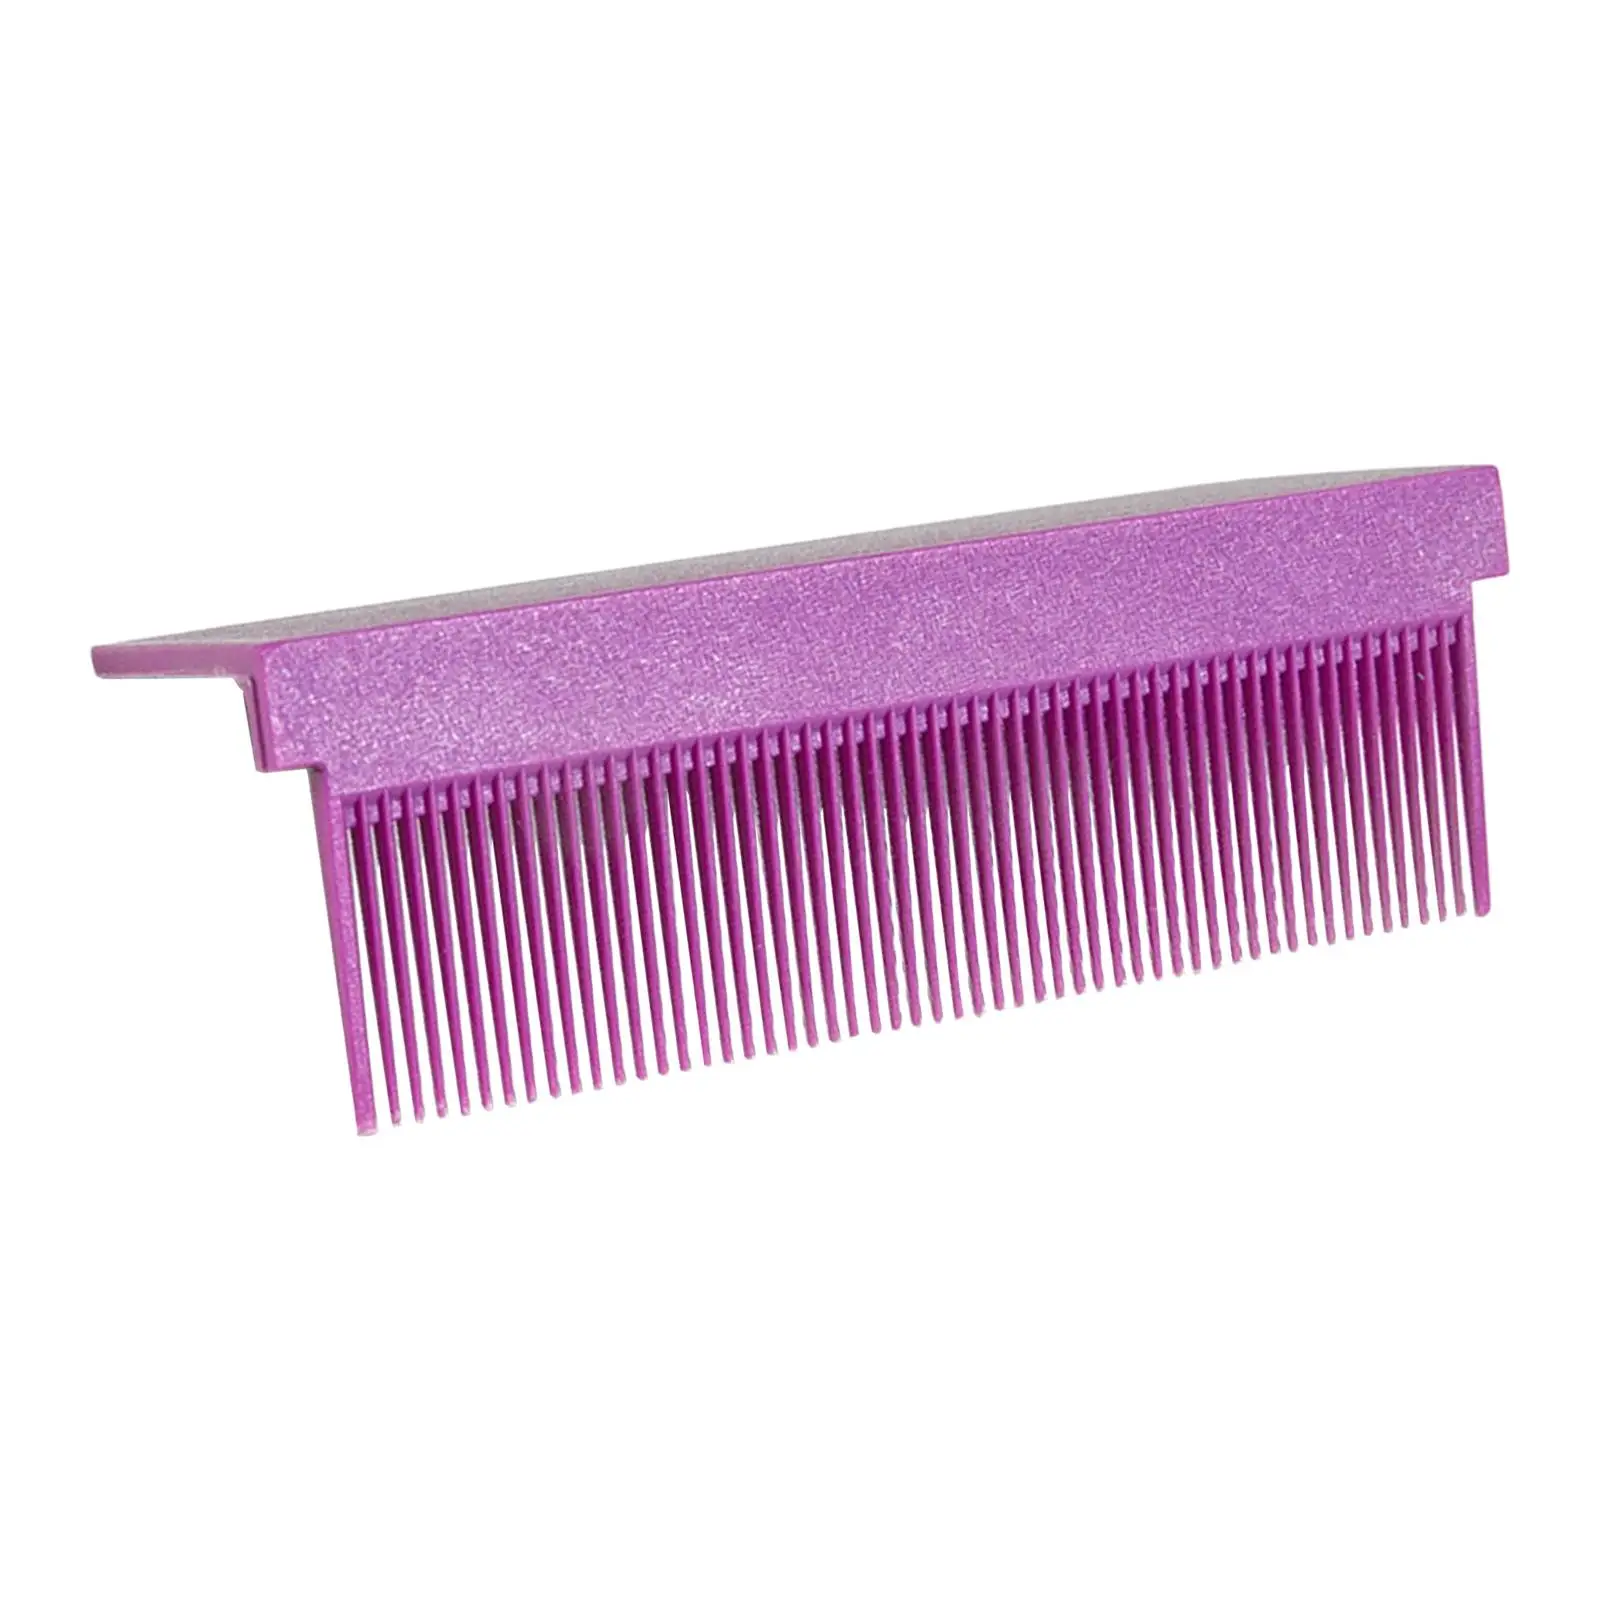 Barber DIY Combs Accessories for Electric Hair Straightener Compact Easily Install Professional V Type Professional or Home Use